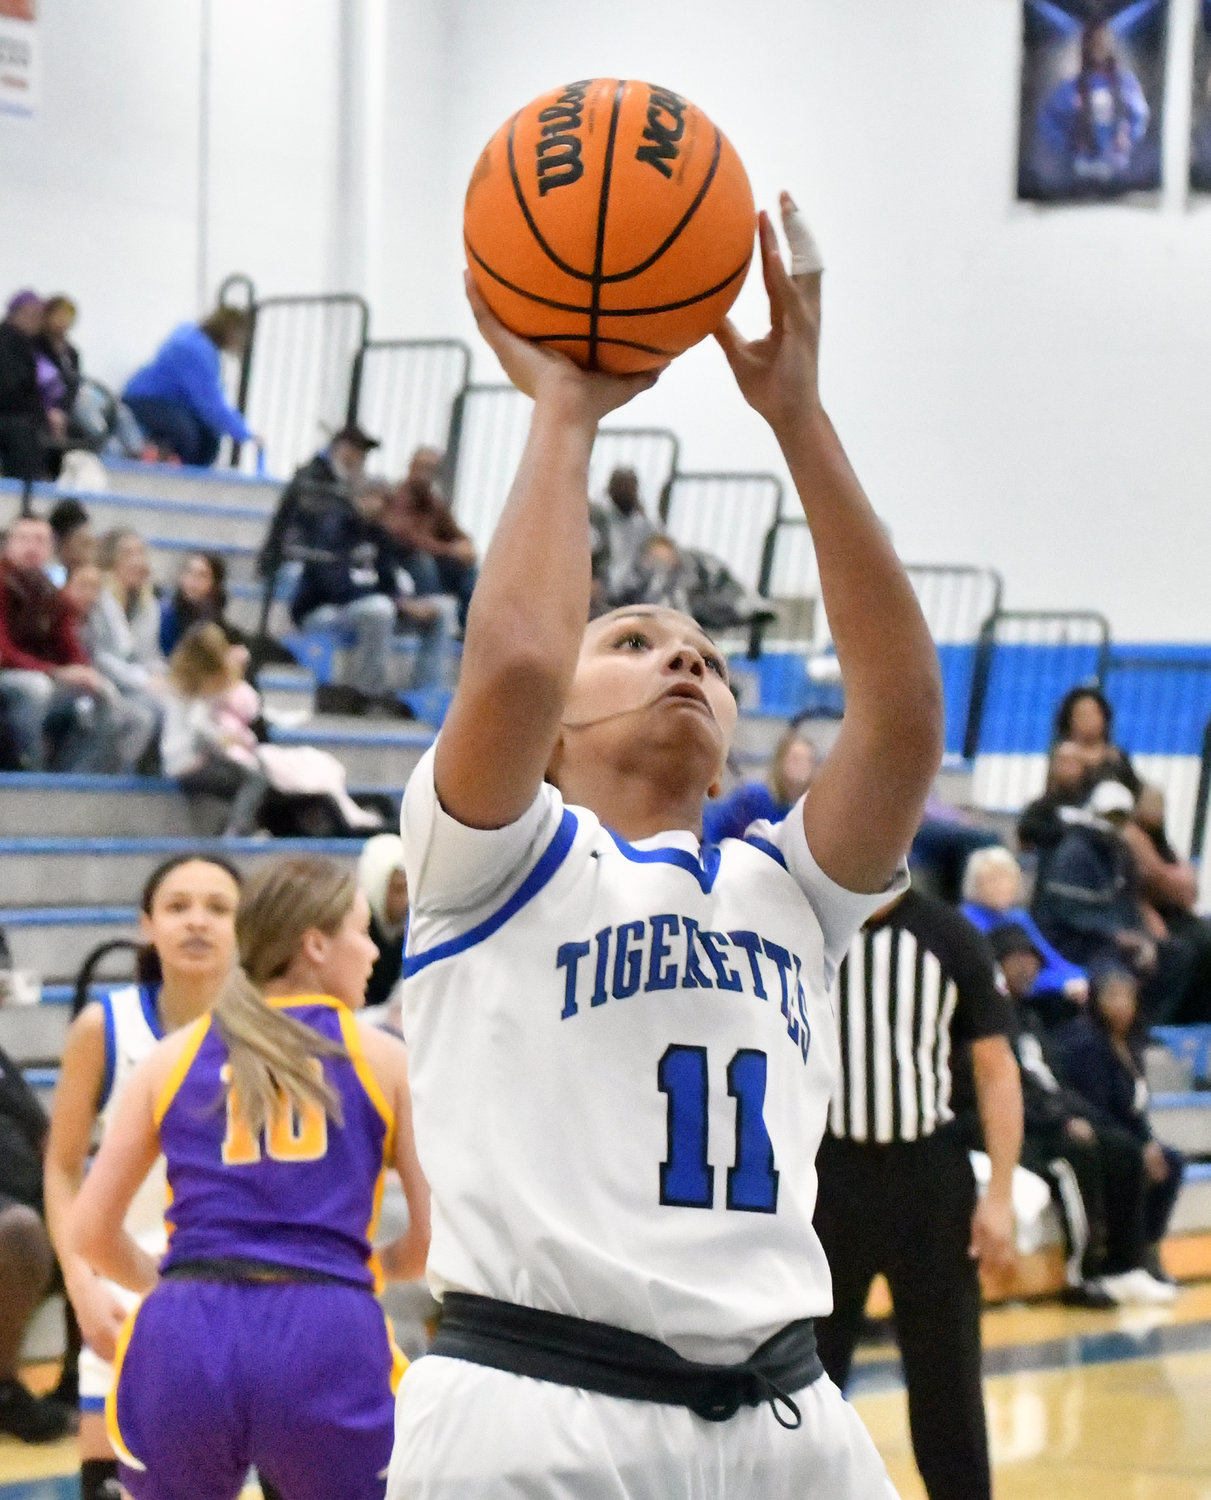 Demiyah Blackman scores in the opening quarter for the Tigerettes. Blackman led Marshall County with 20 points.